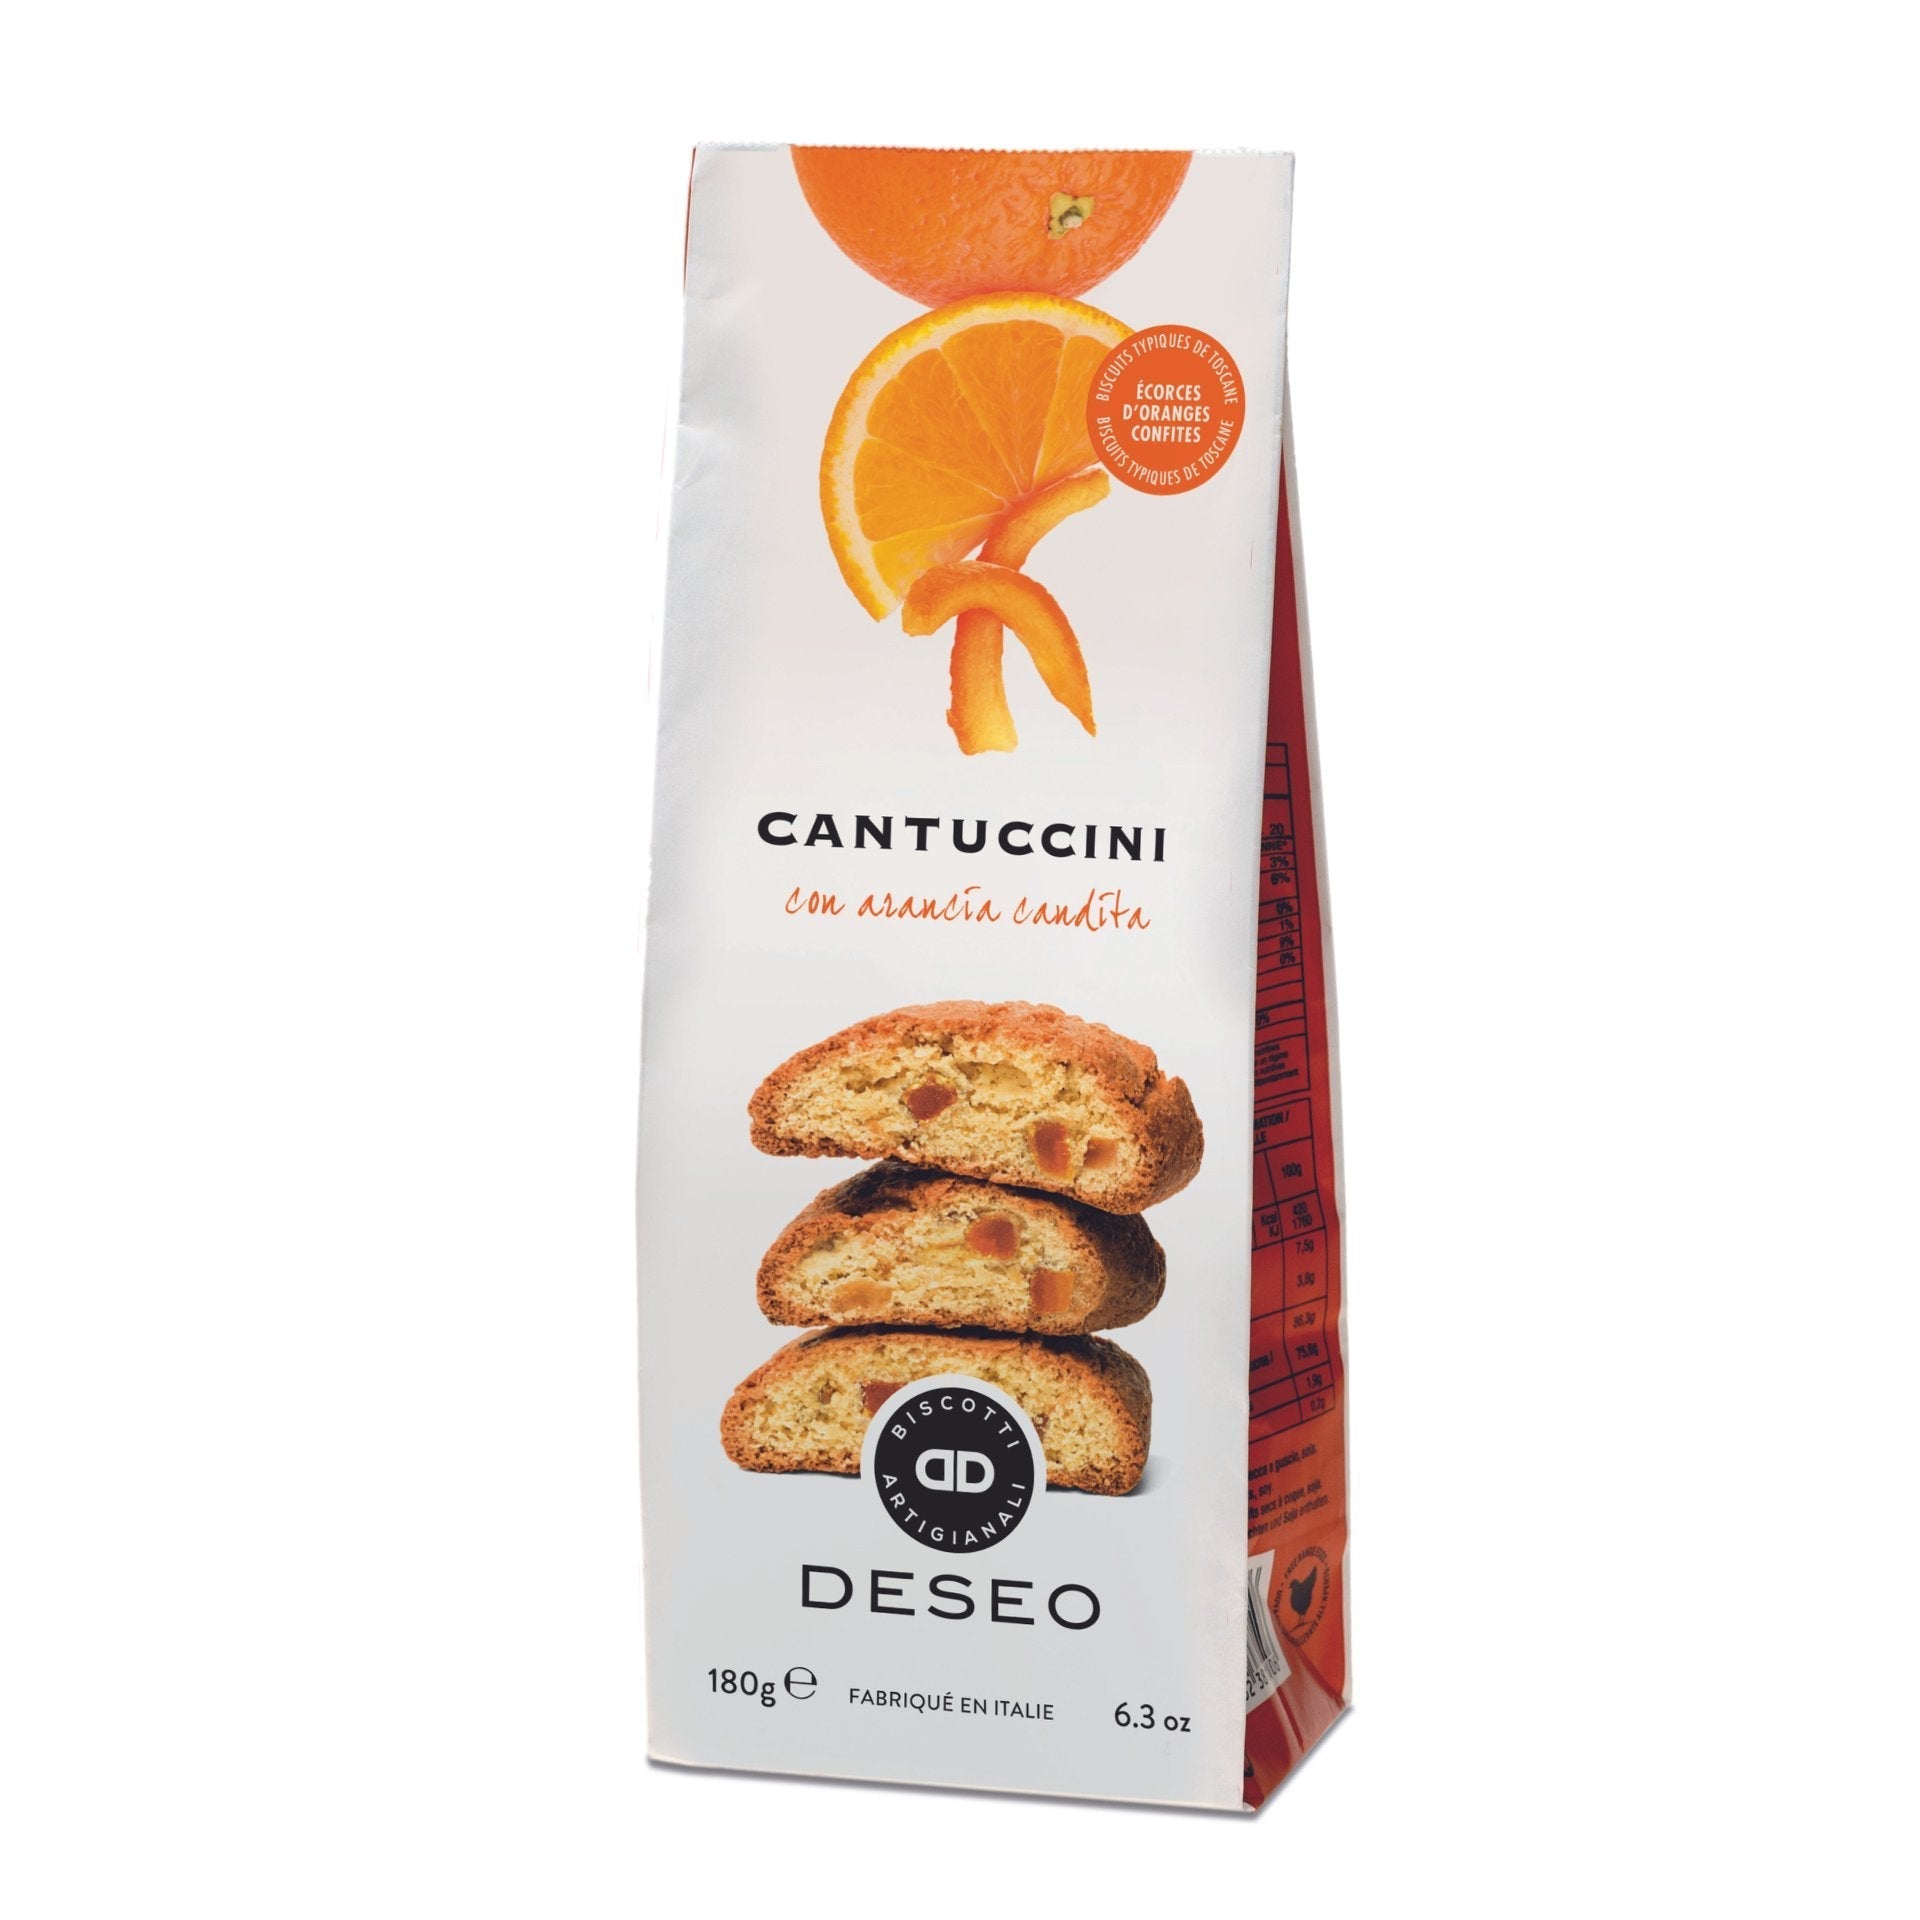 Deseo Cantuccini Toscani with Candied Orange 180g (Bag)  | Imported and distributed in the UK by Just Gourmet Foods